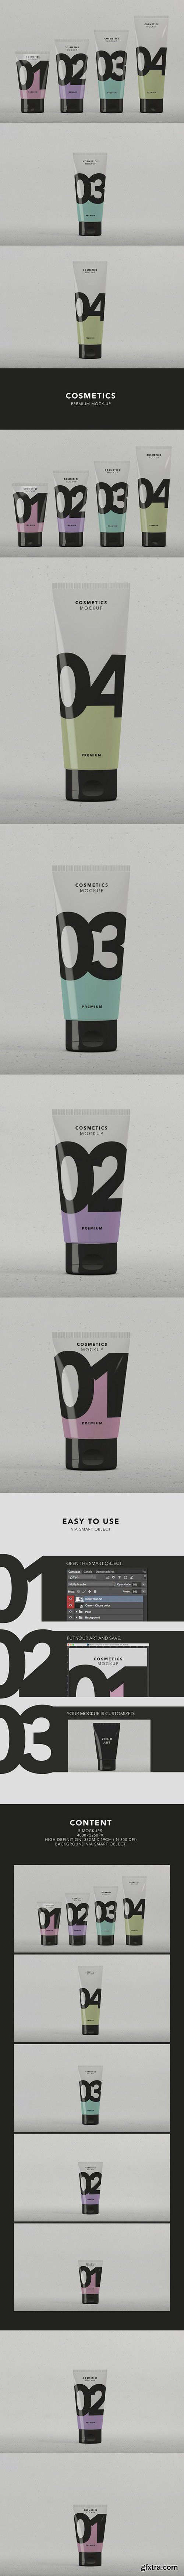 CM - Cosmetics Package Mock-up 419337